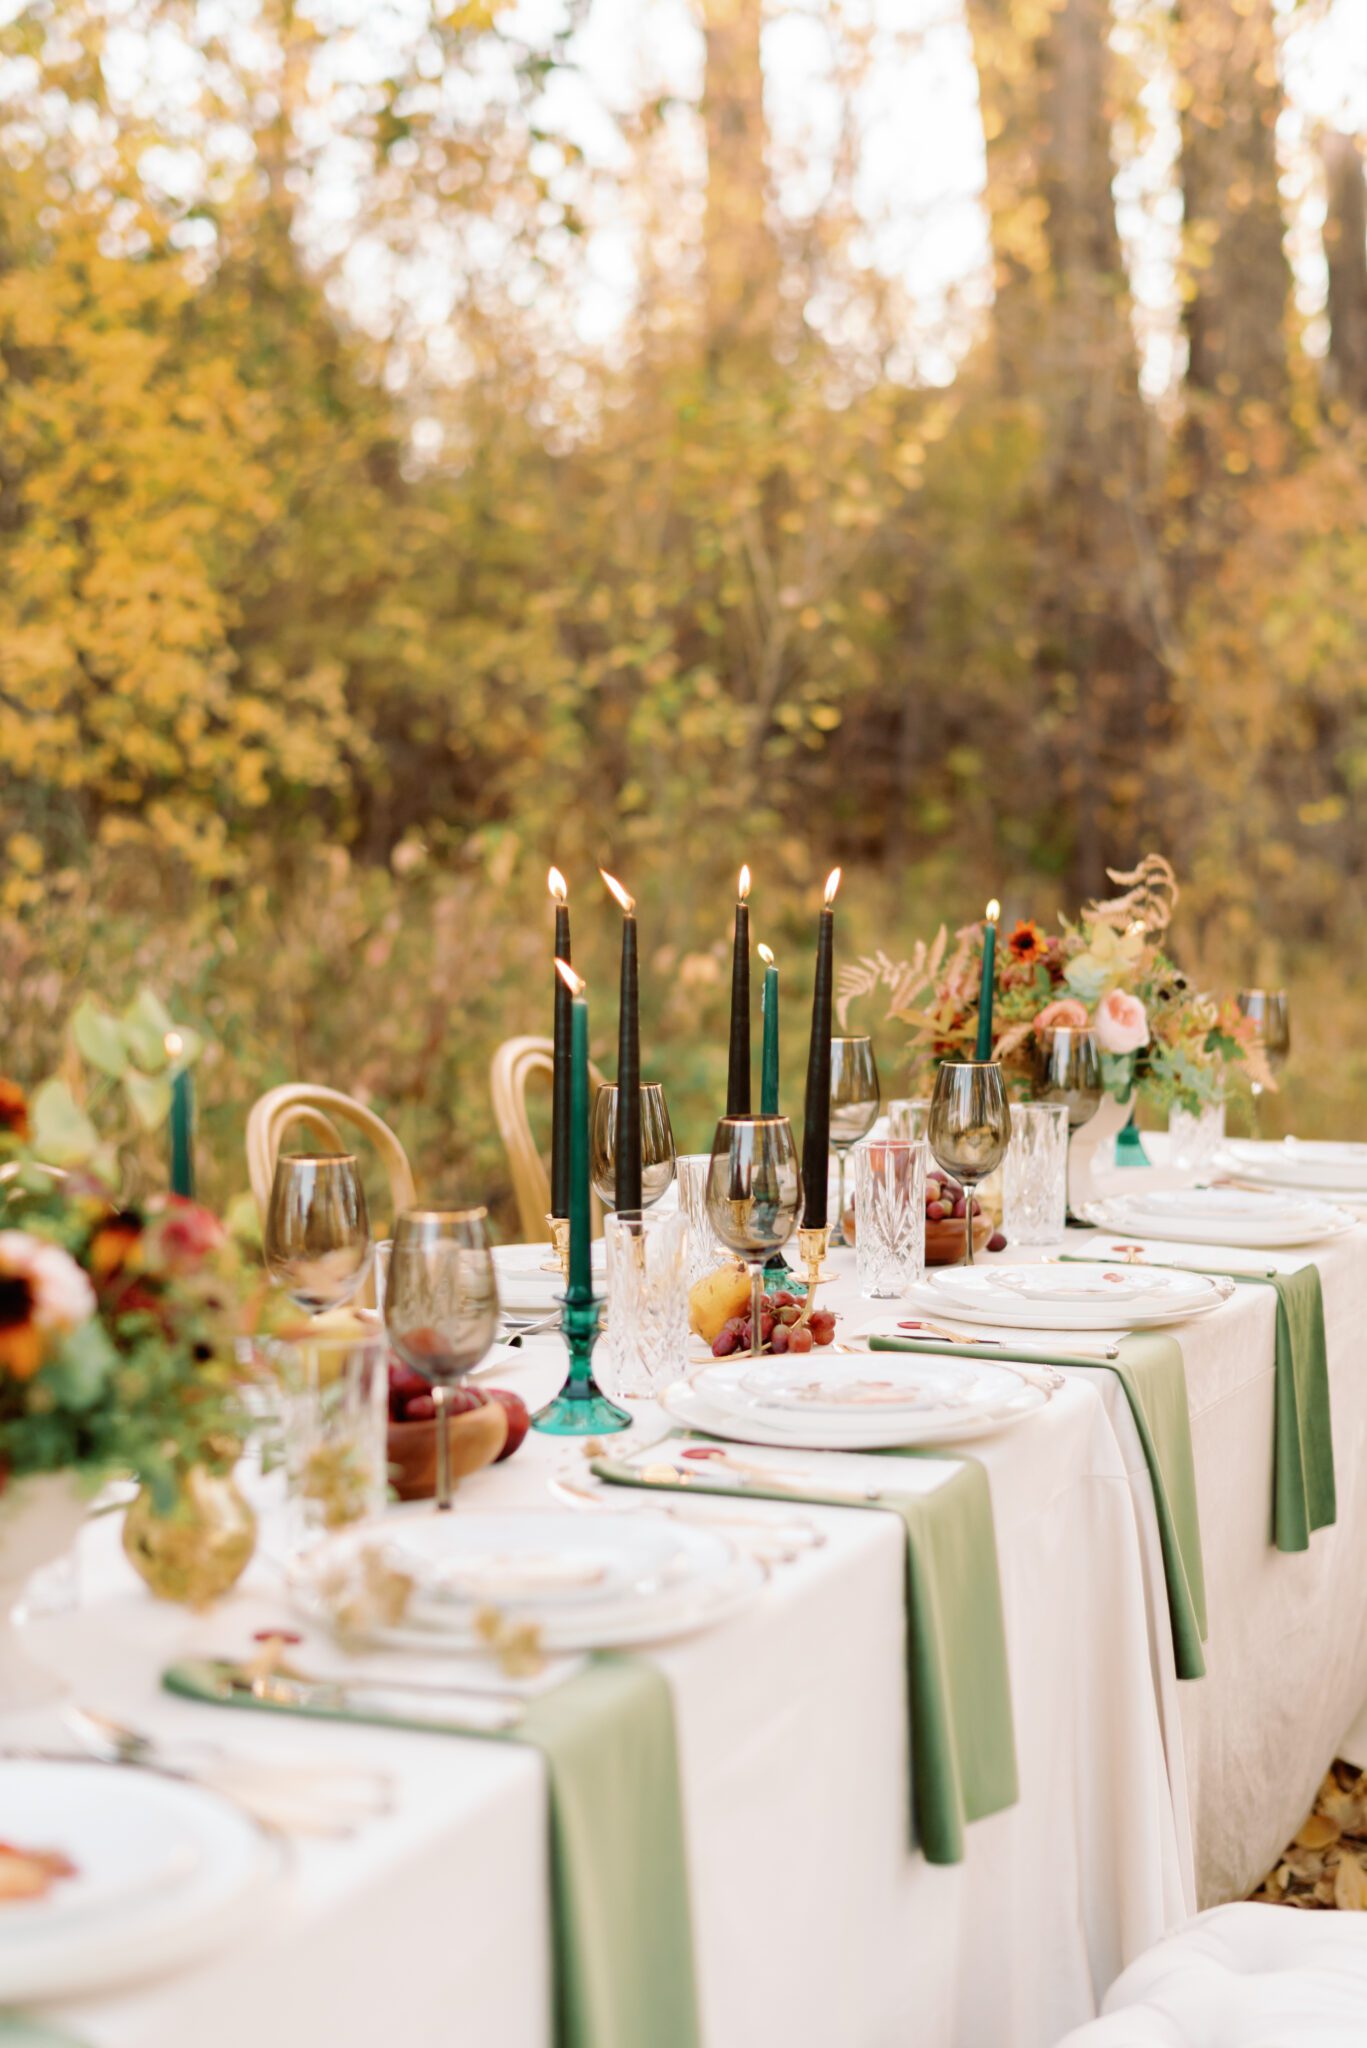 Al fresco dining at golden hour. Intimate autumn wedding reception tablescape featuring olive green, burgundy and rust details, elegant menus with crimson wax seals and gold tassel accents, as well as smoke tinted glassware, gold-rimmed vintage china with fruit still lifes painted on them, pearl cutlery, and antique gold pear candleholders